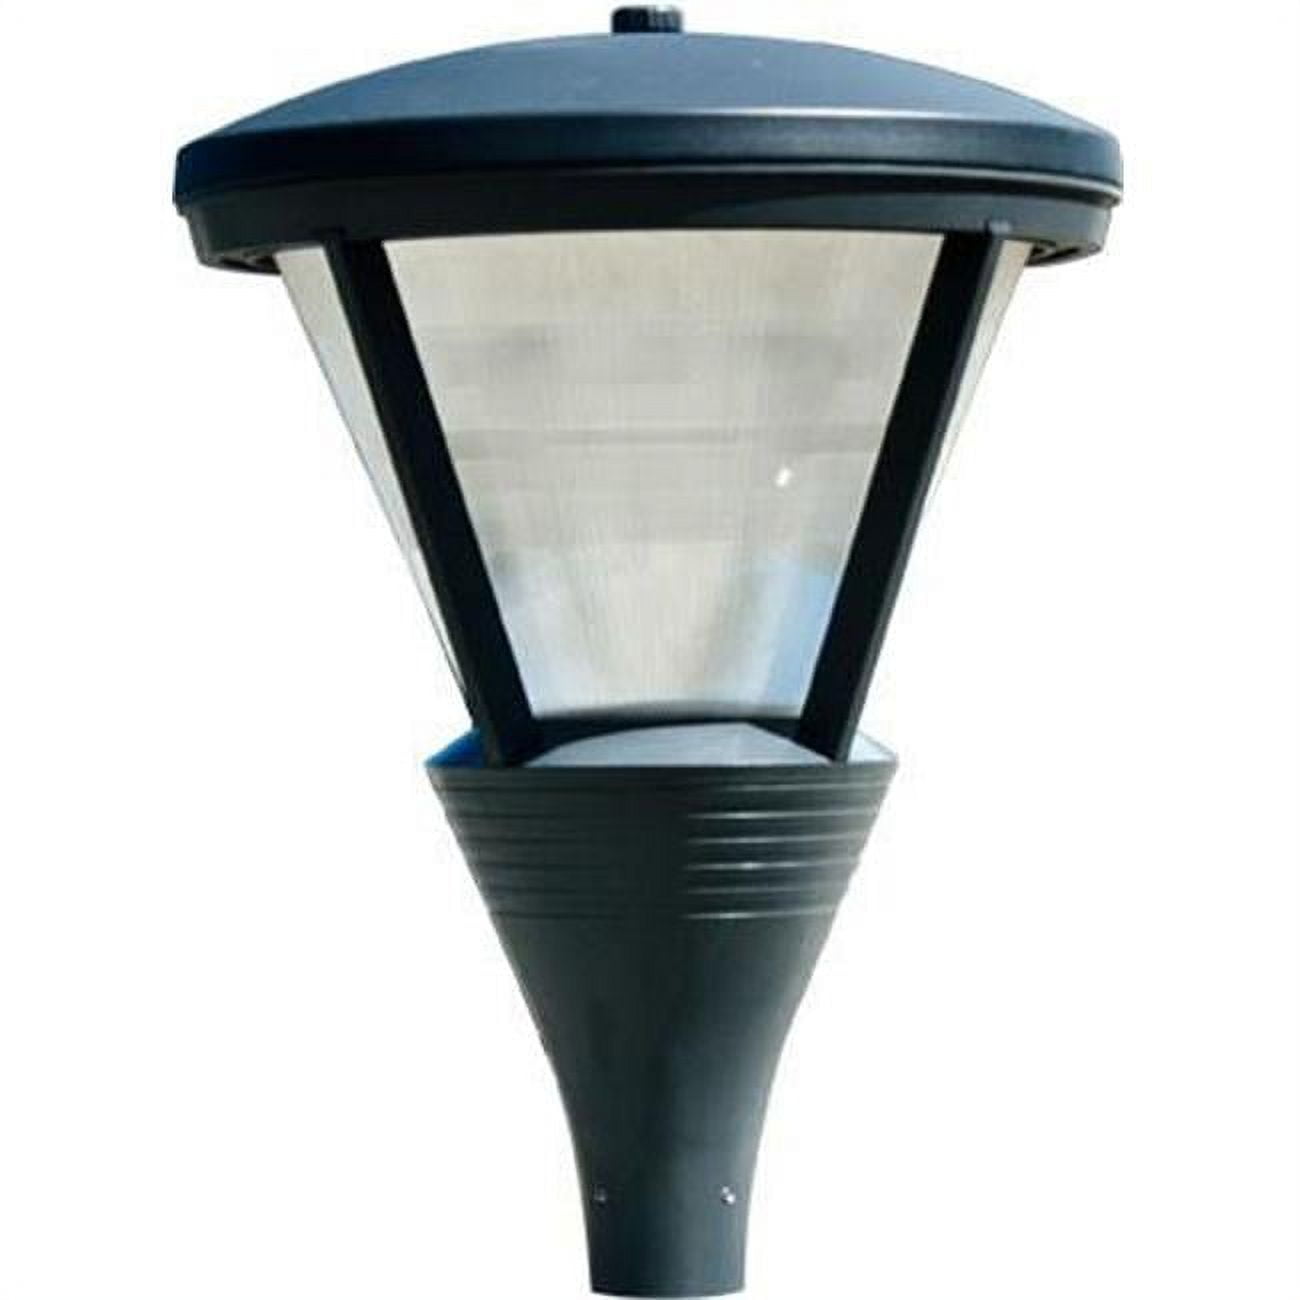 Picture of Dabmar Lighting GM583-B Powder Coated Cast Aluminum Architectural Post Top Light Fixture, Black - 34.50 x 25.25 x 25.25 in.